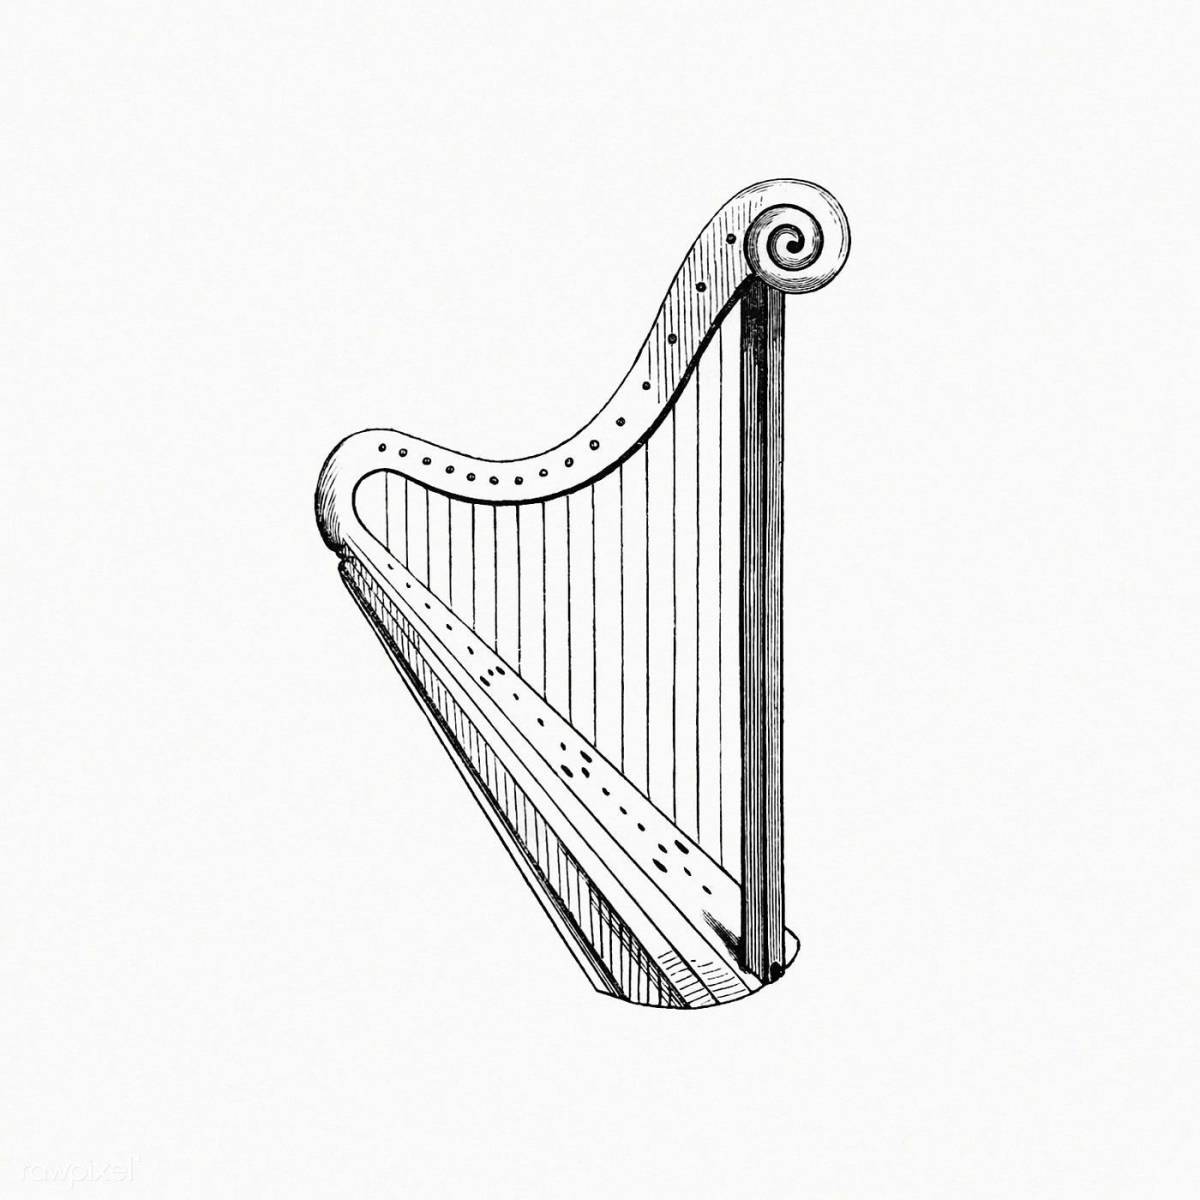 Coloring book charming harp